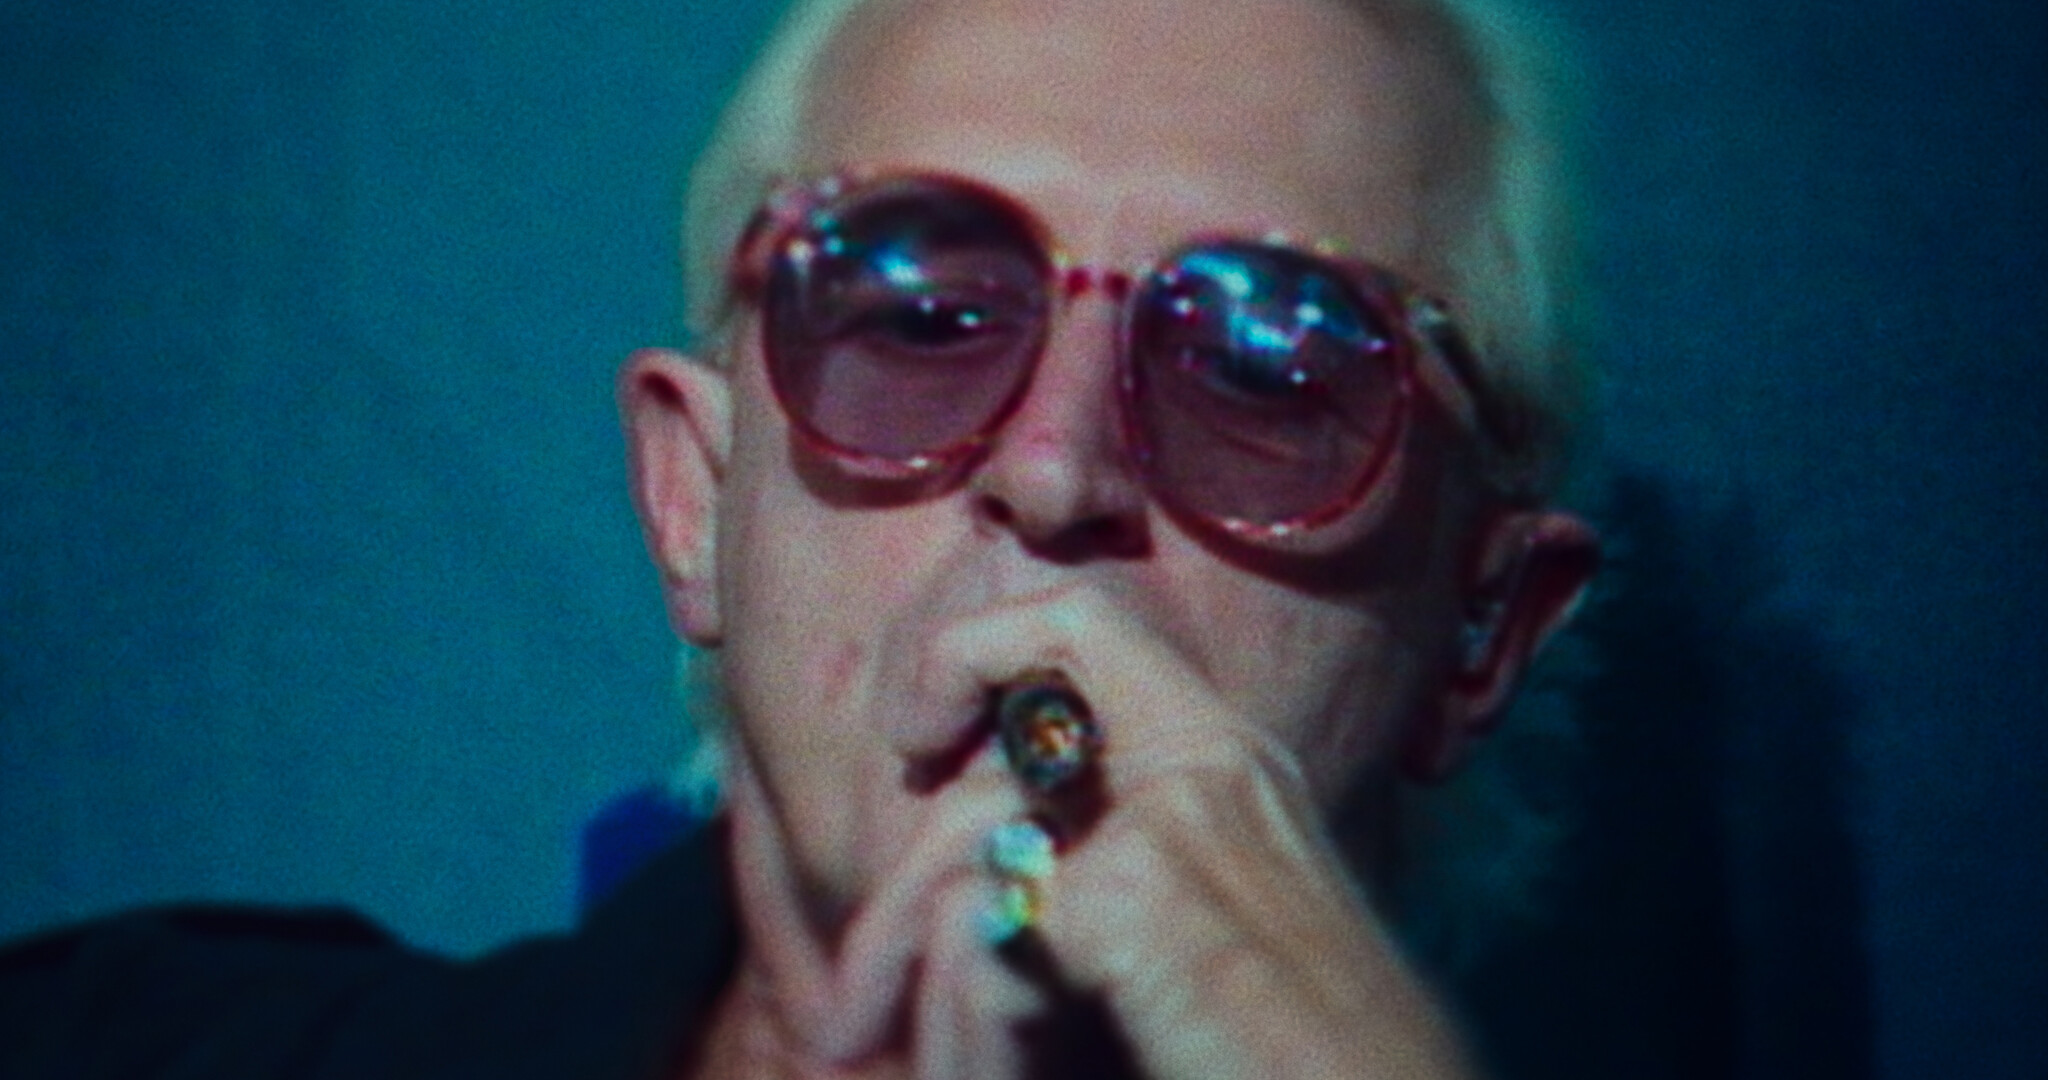 Who Was Jimmy Savile and What Crimes Did He Commit? image